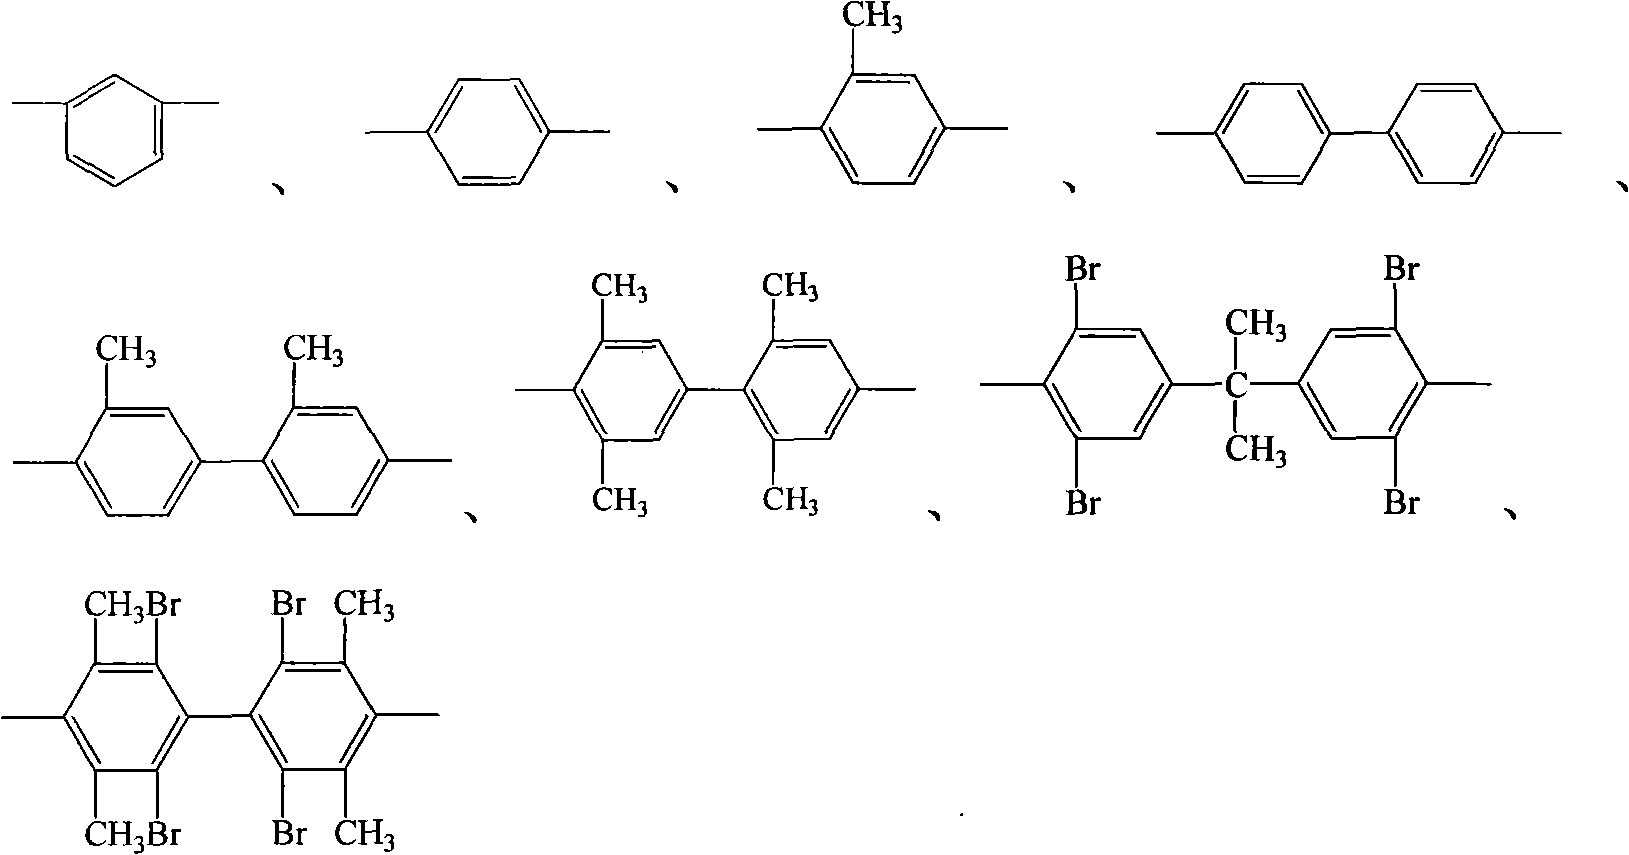 Process for producing aromatic diaether dianhydride monomer